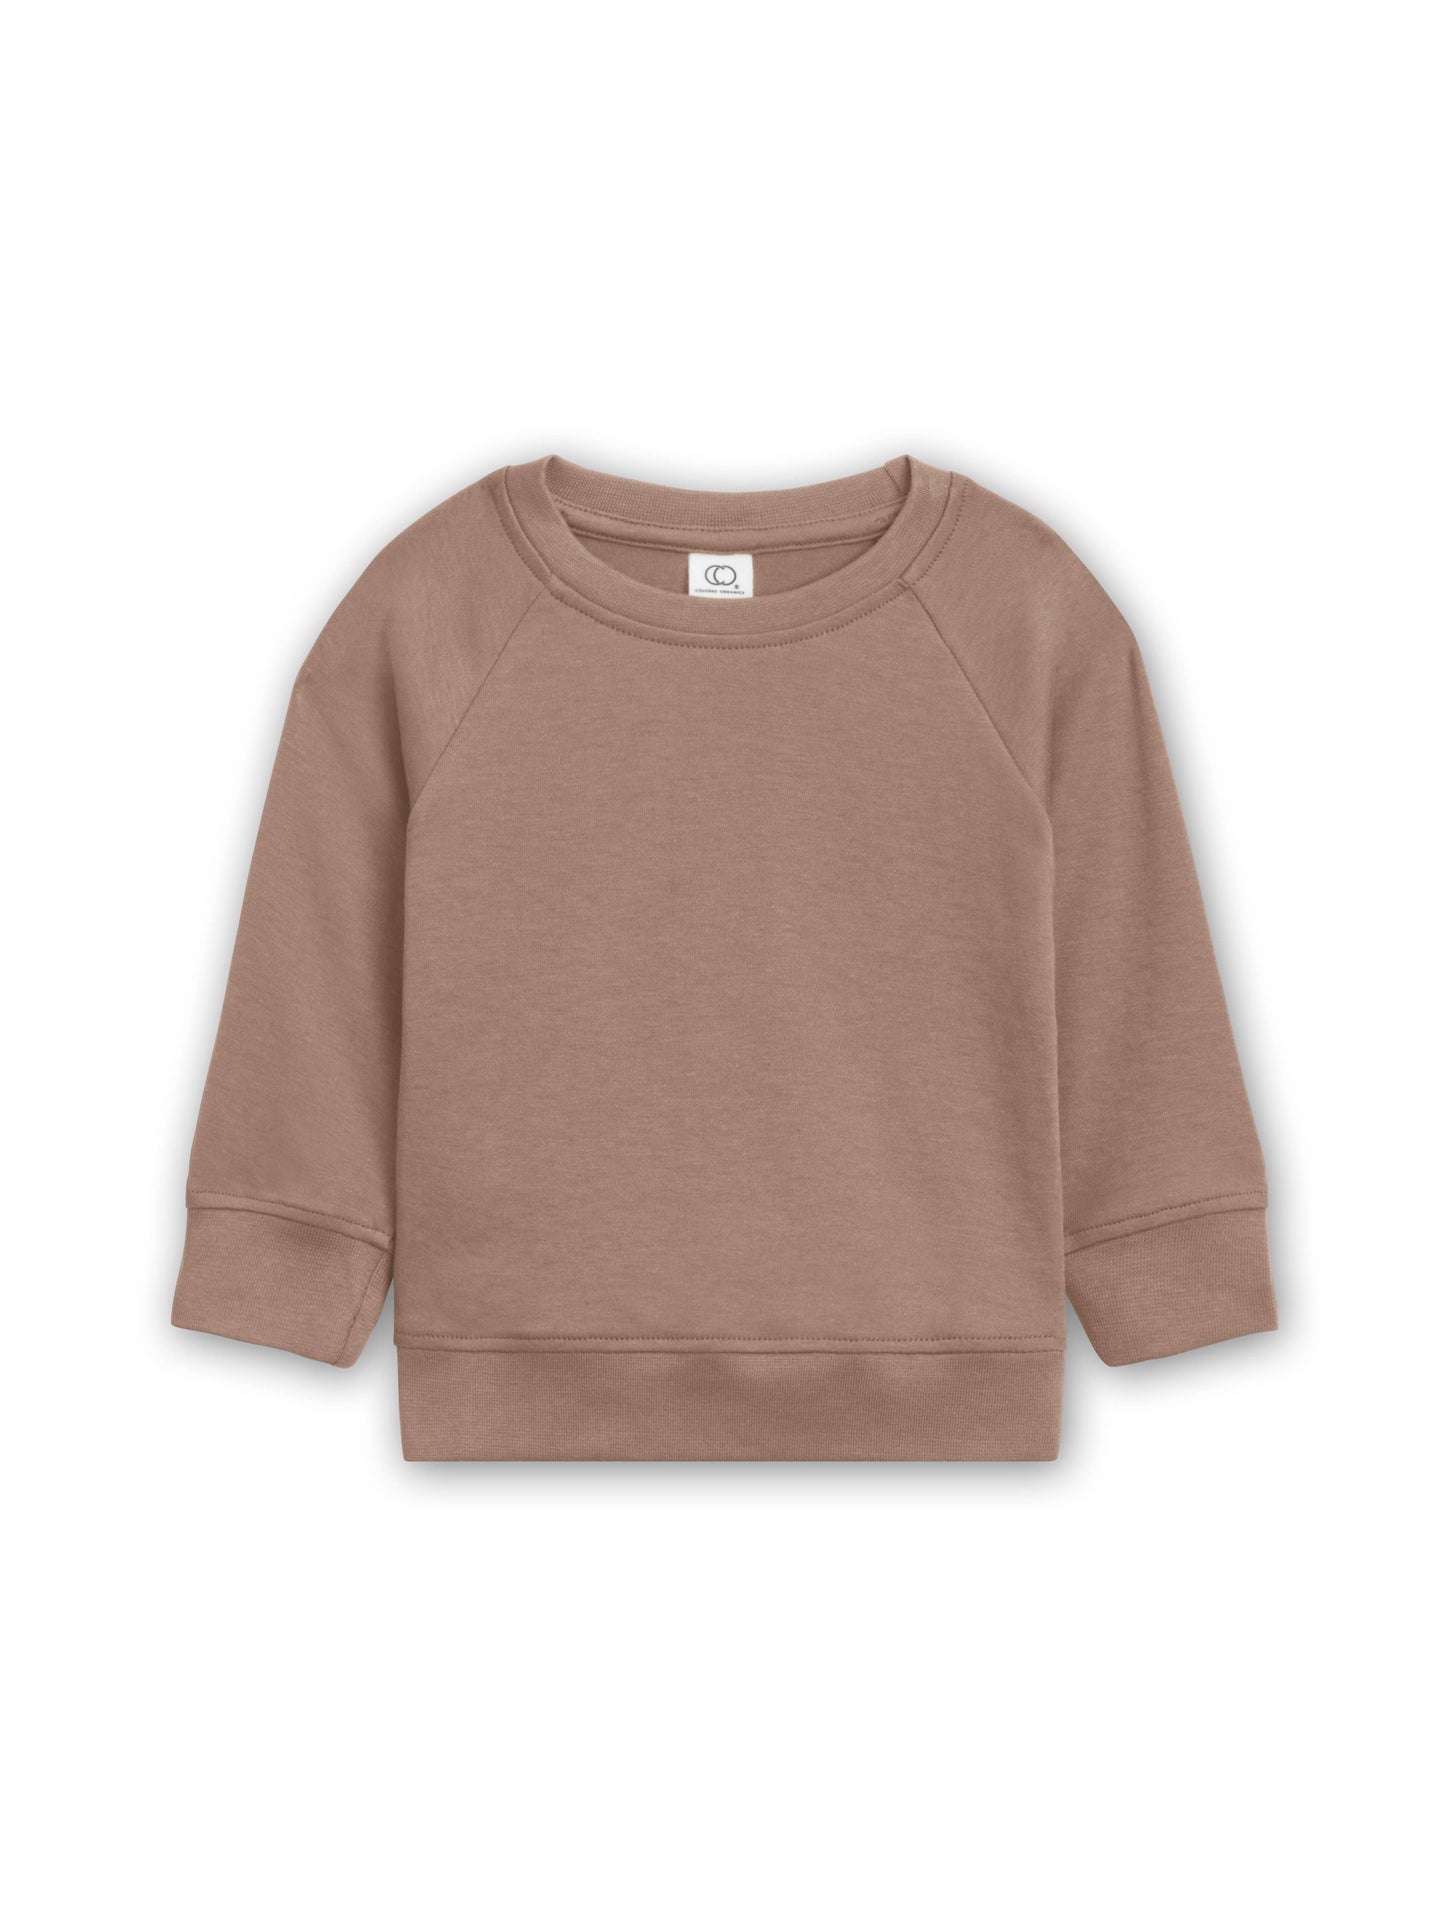 Organic Baby and Kids Portland Pullover - Truffle: 3T